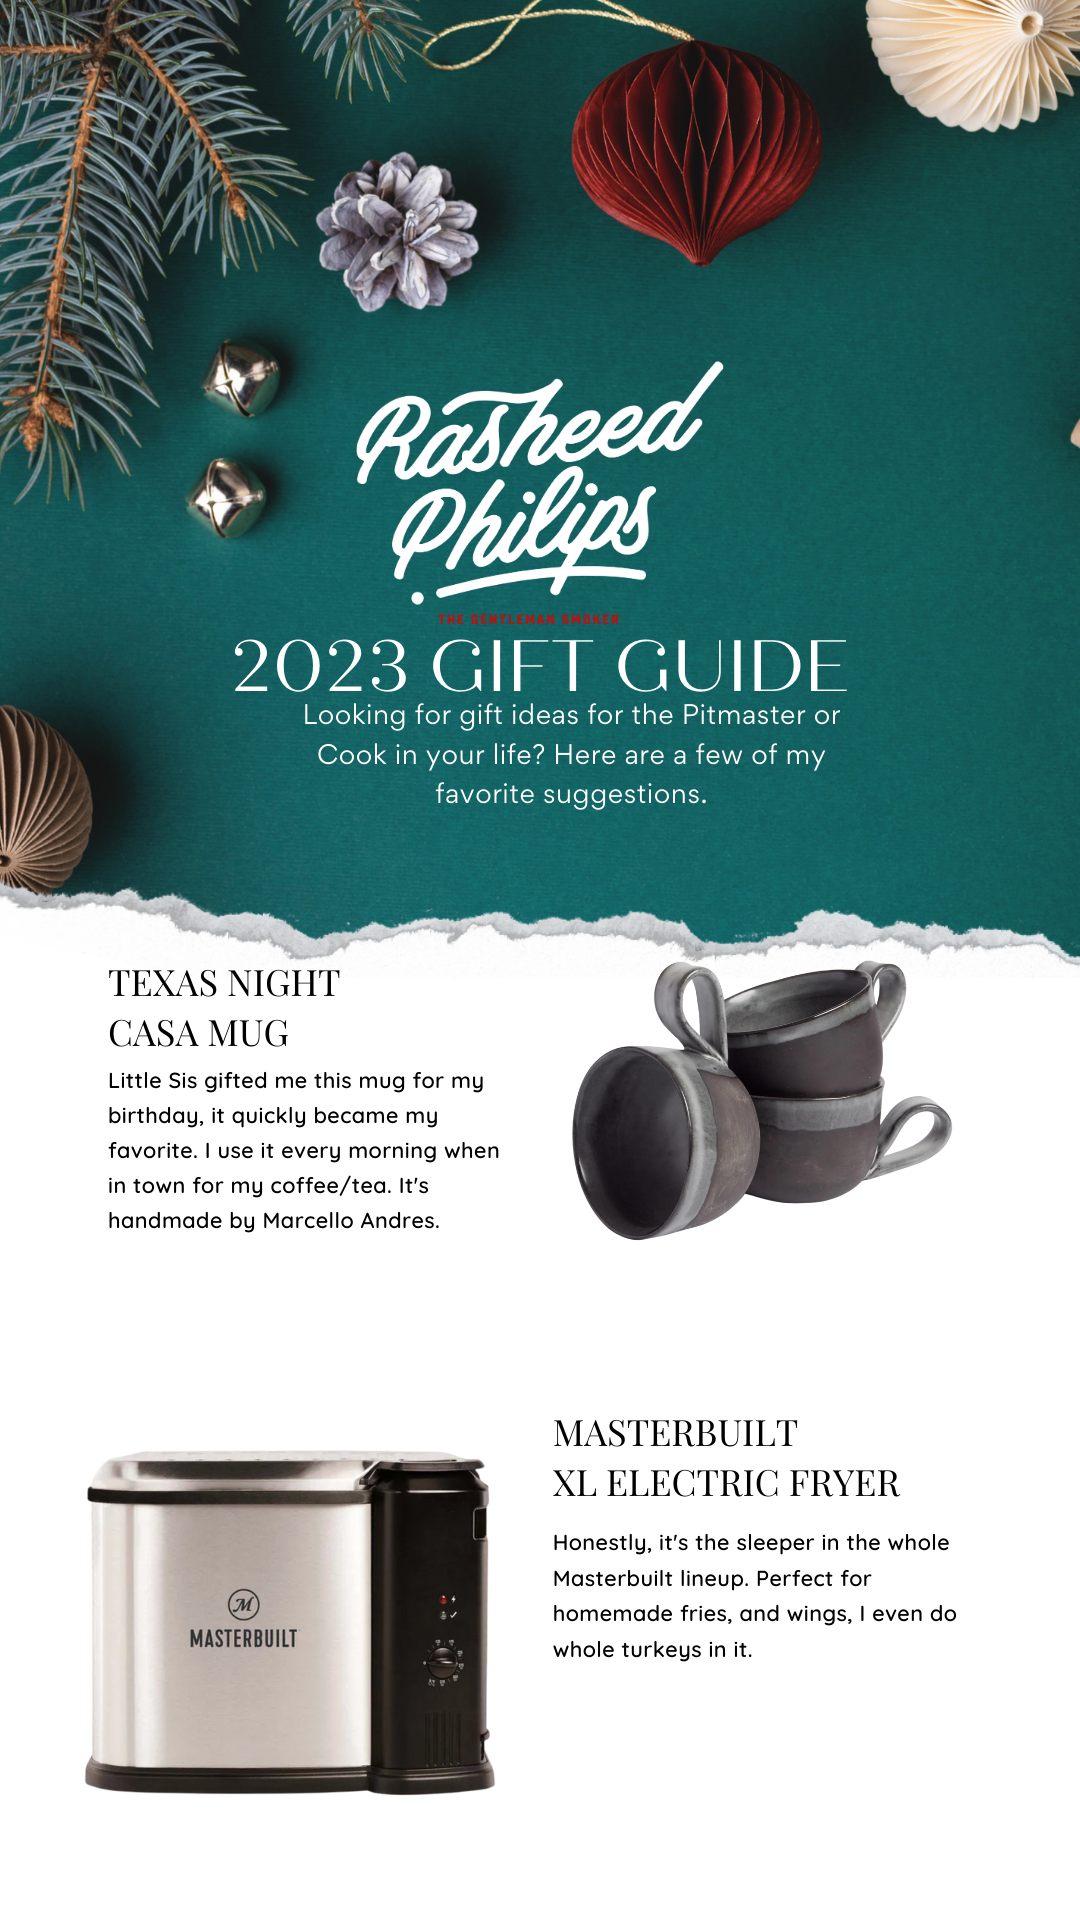 Gift guide for chefs in your life!